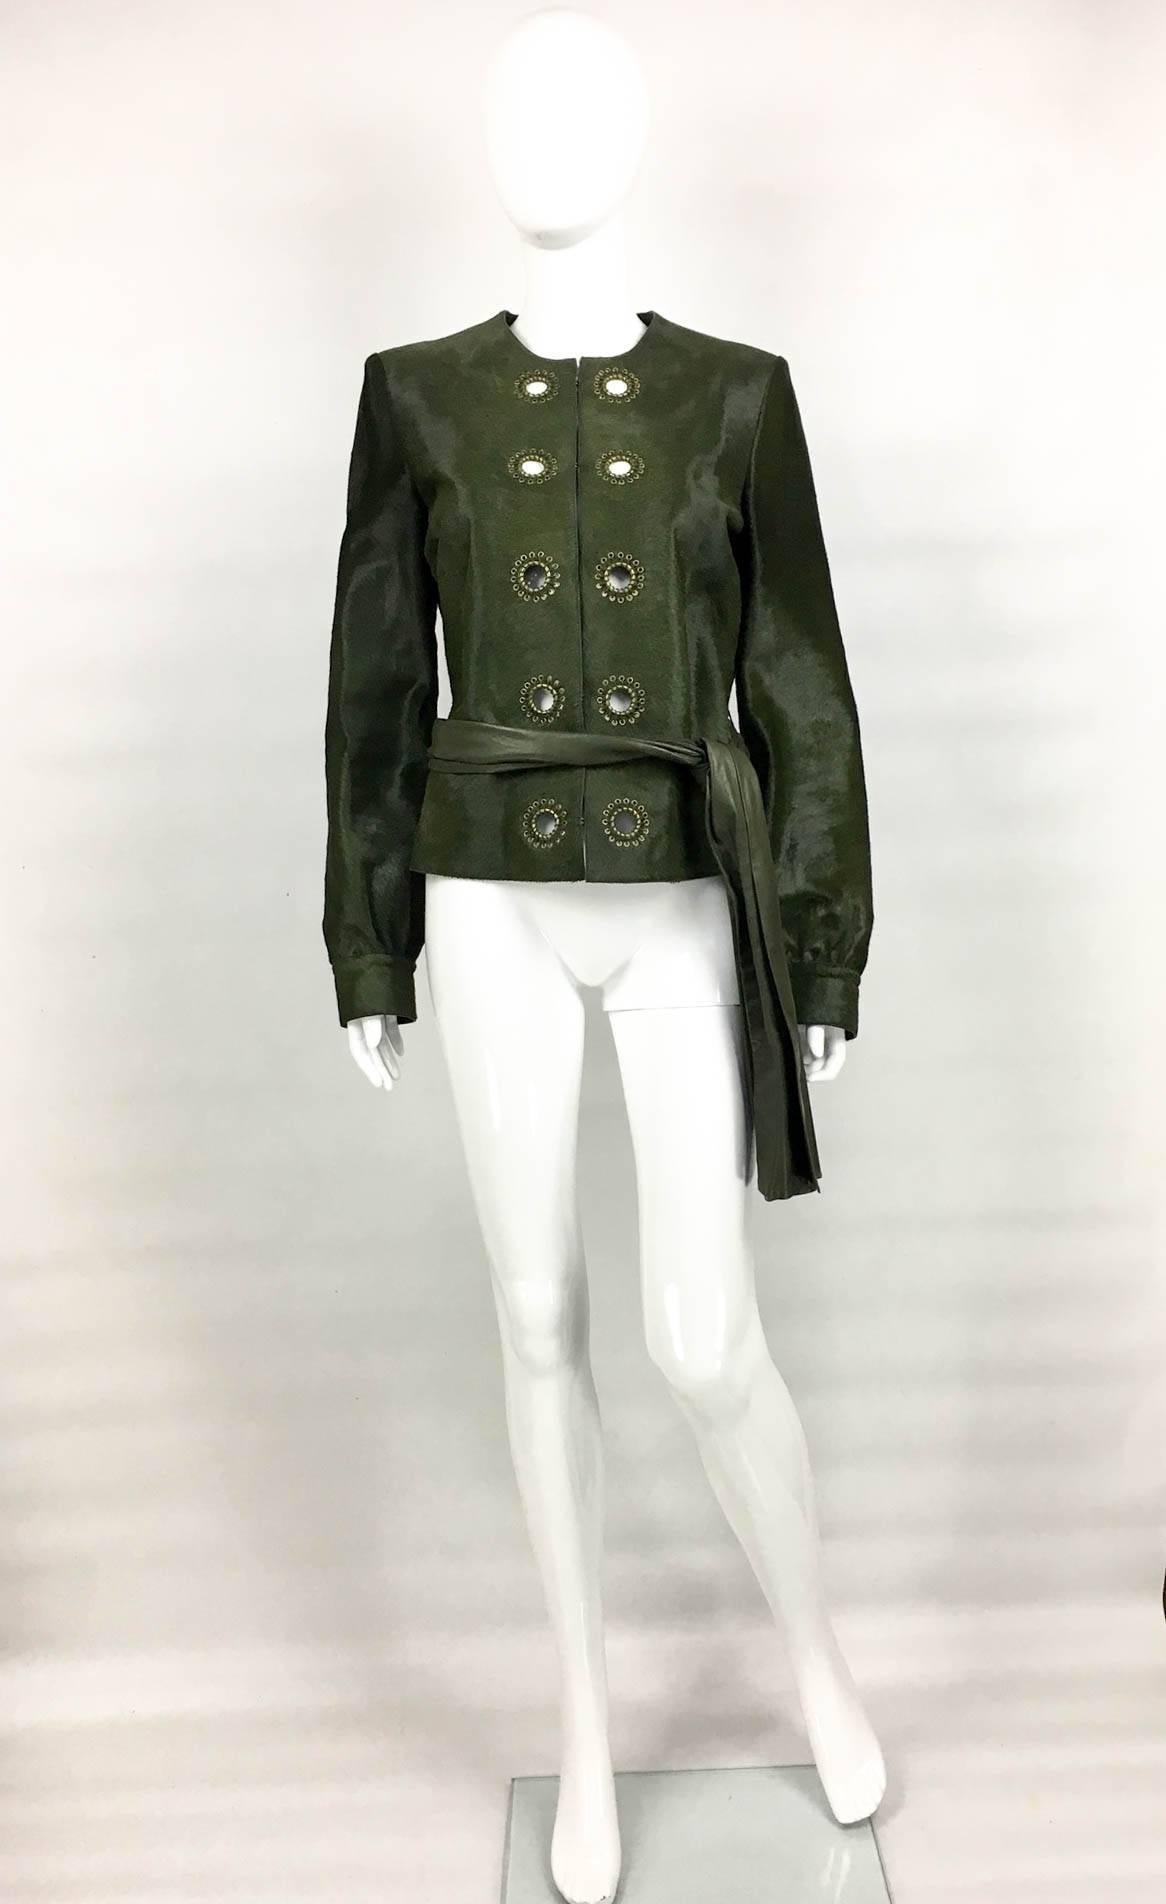 Gorgeous Yves Saint Laurent Moss Green Ponyskin Jacket. This fabulous unworn jacket by Saint Laurent is made of the best quality ponyskin / calf hair in moss green. It features brass eyelets down the front. The closure is done by hooks, which are